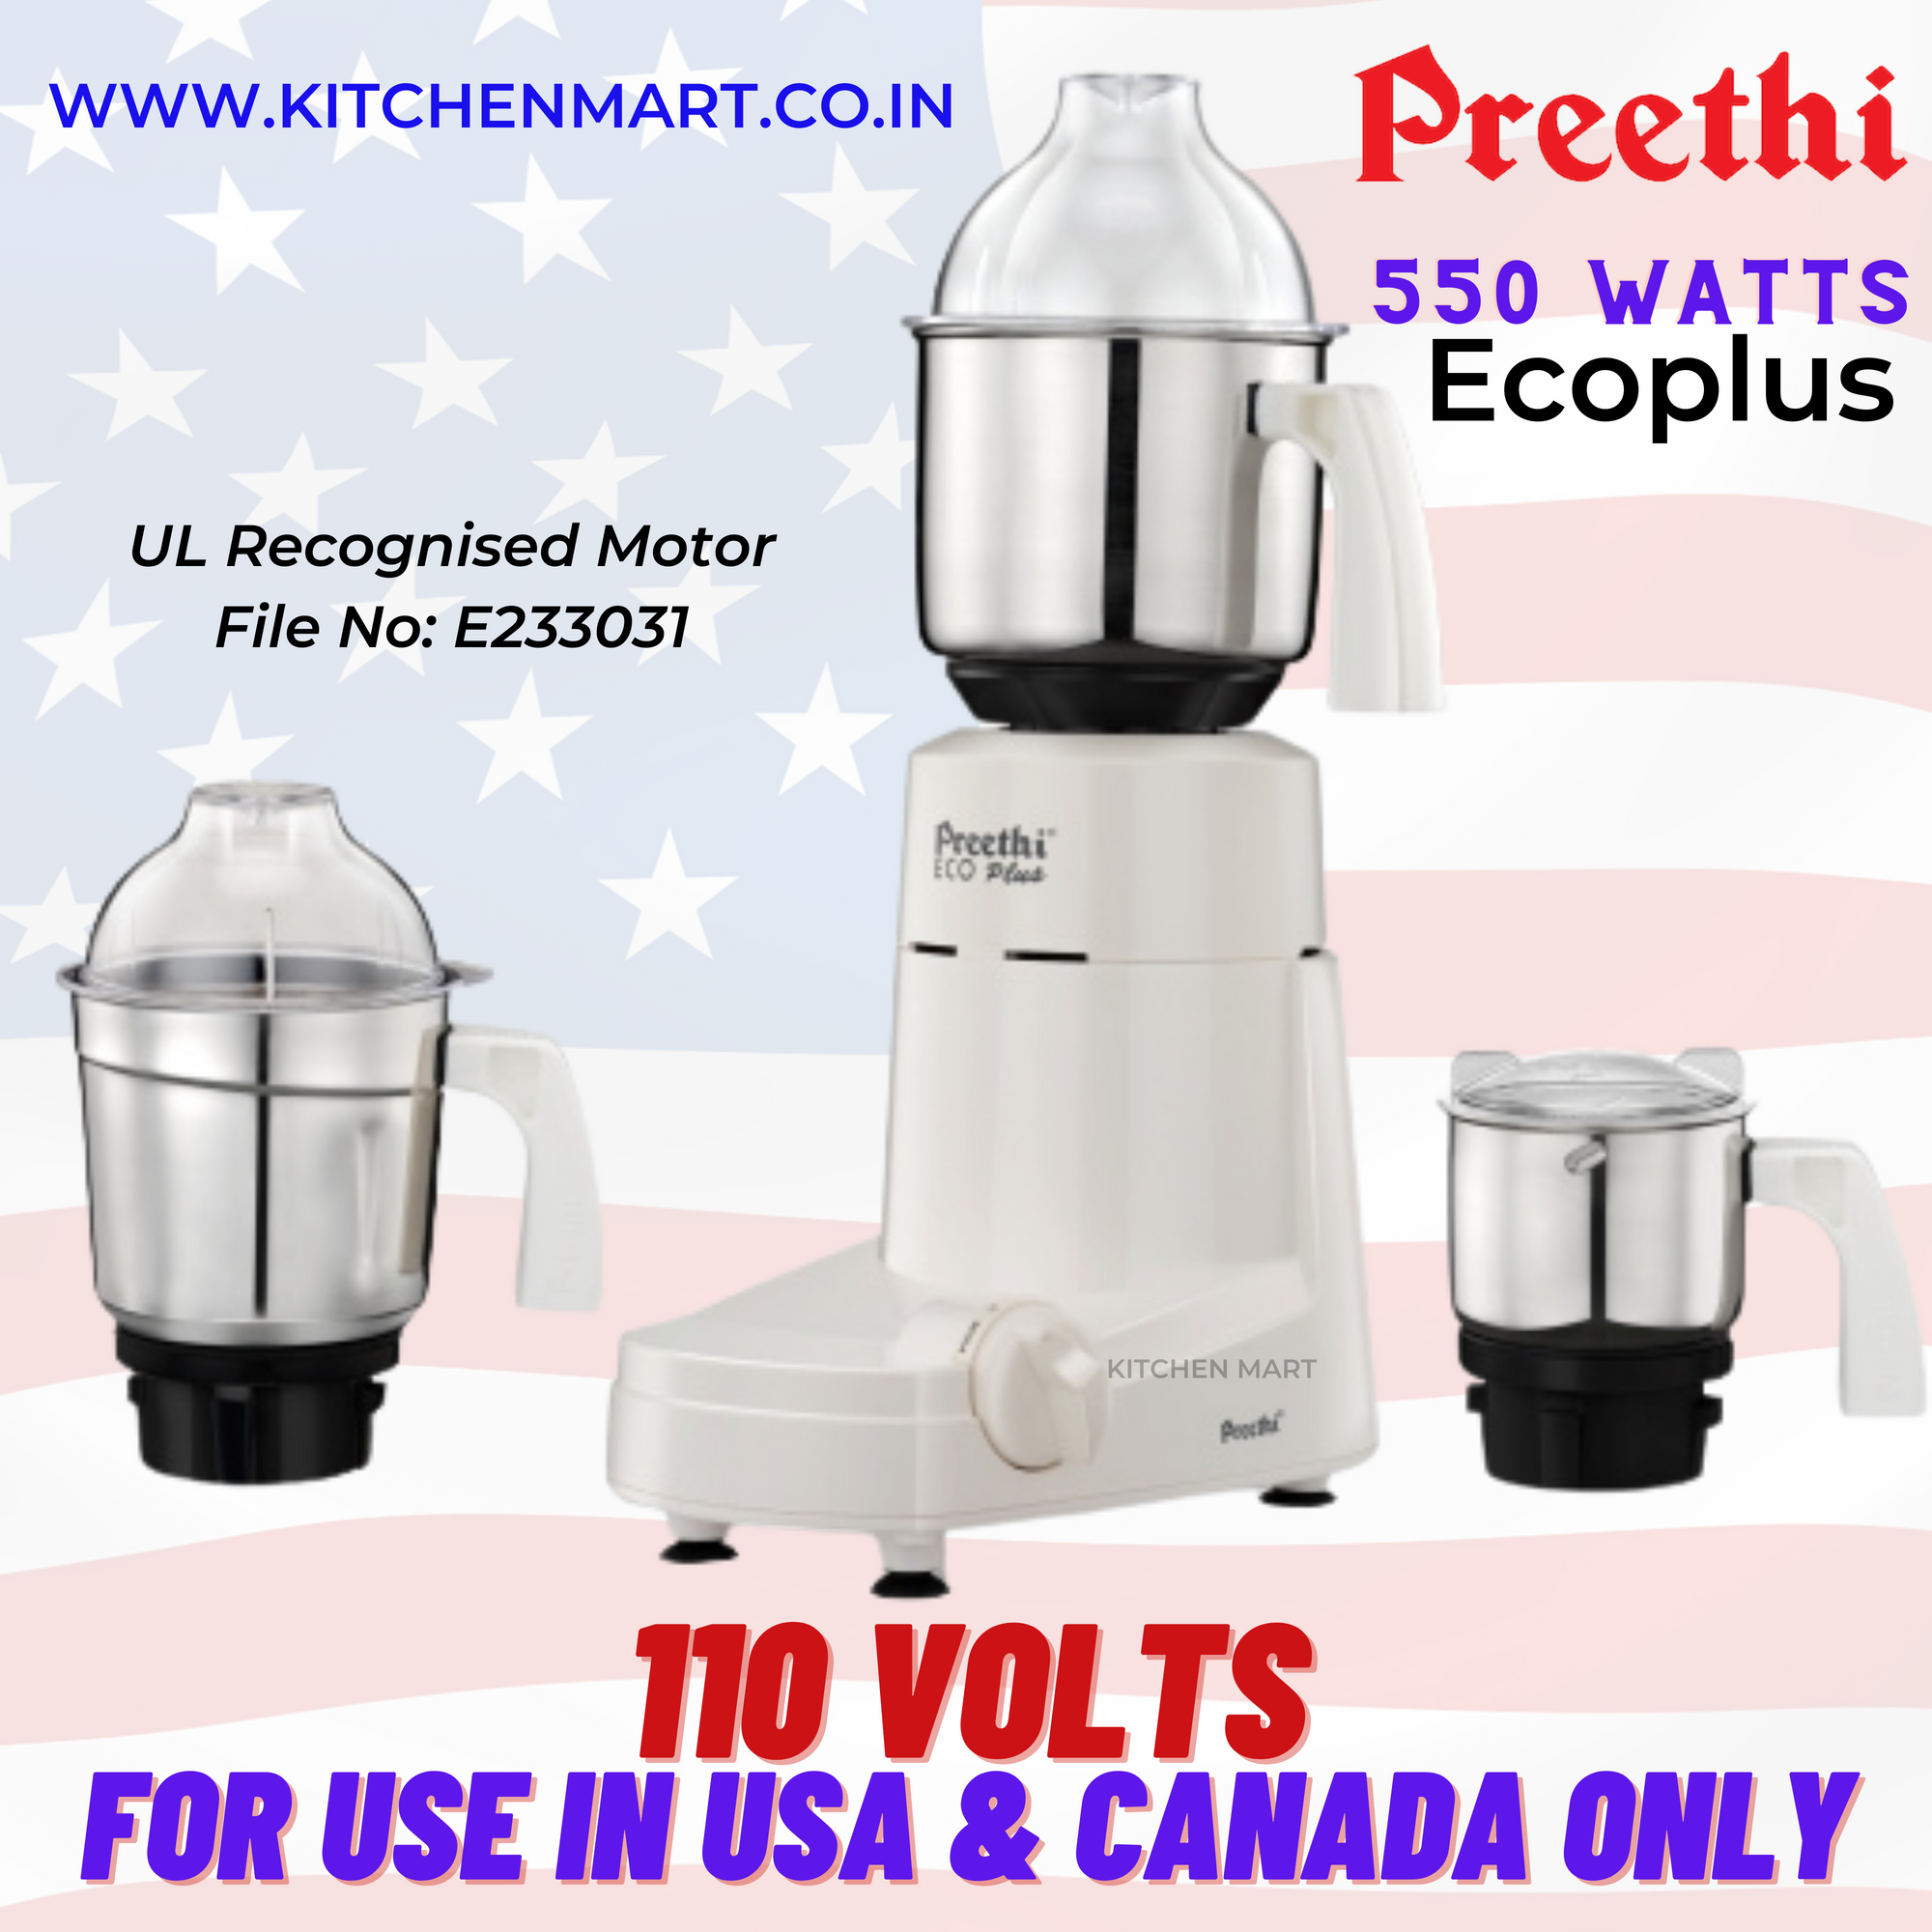 Preethi Eco Plus 110 Volts Mixer Grinder (For Use In Usa & Canada Only),White